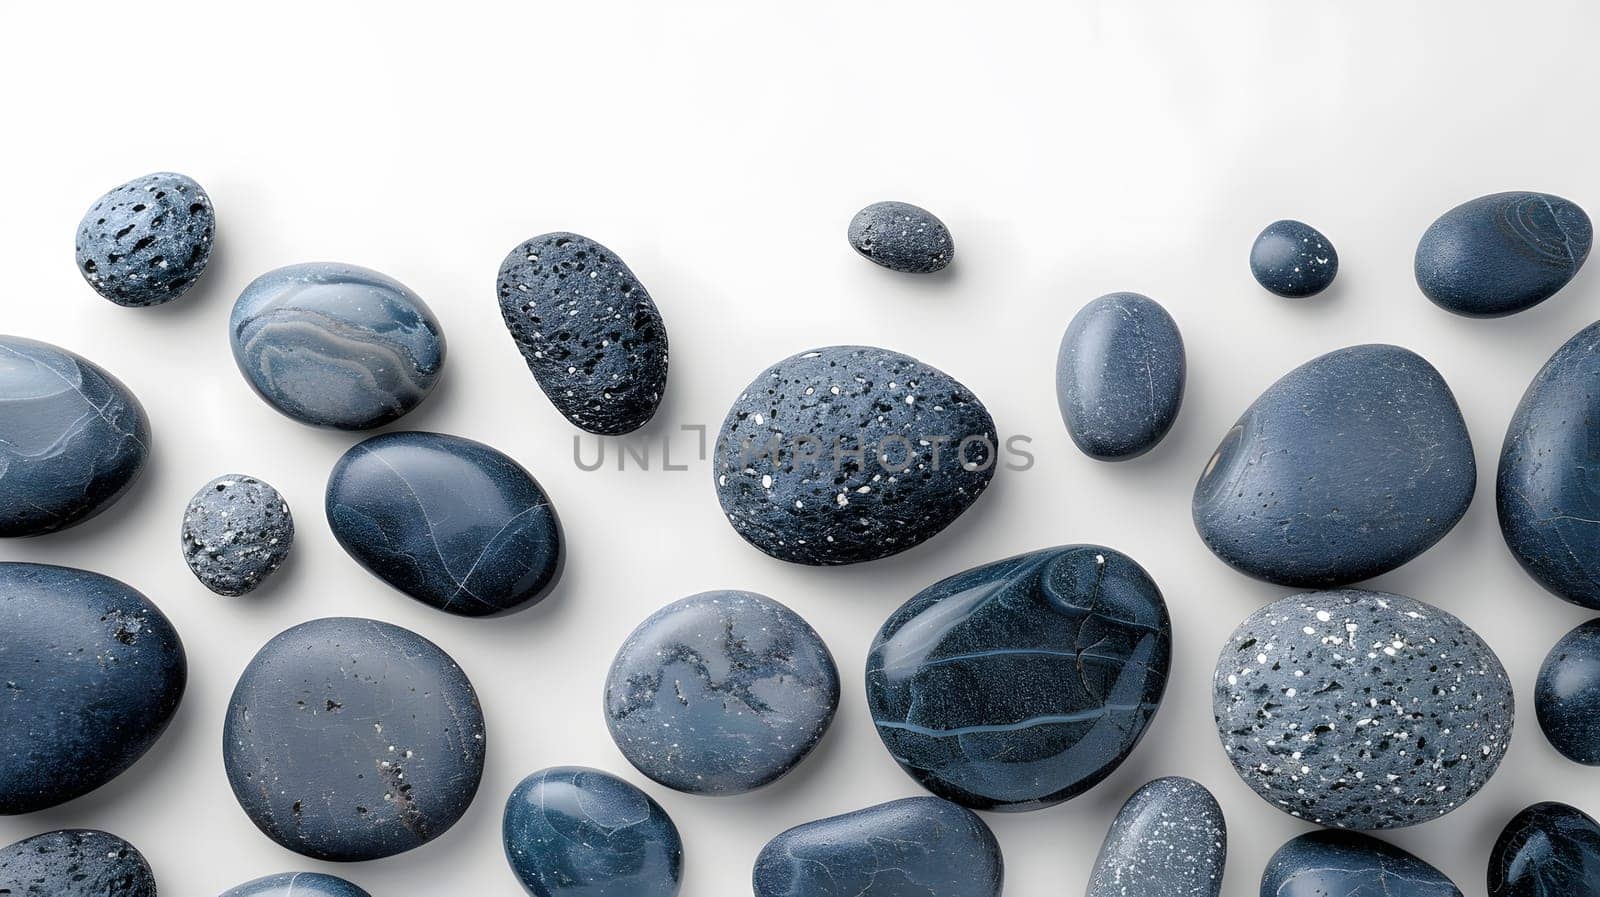 A collection of black rocks sits on a clean white surface, creating a striking pattern. Among the pebbles are electric blue circles resembling a fashion accessory or automotive tire